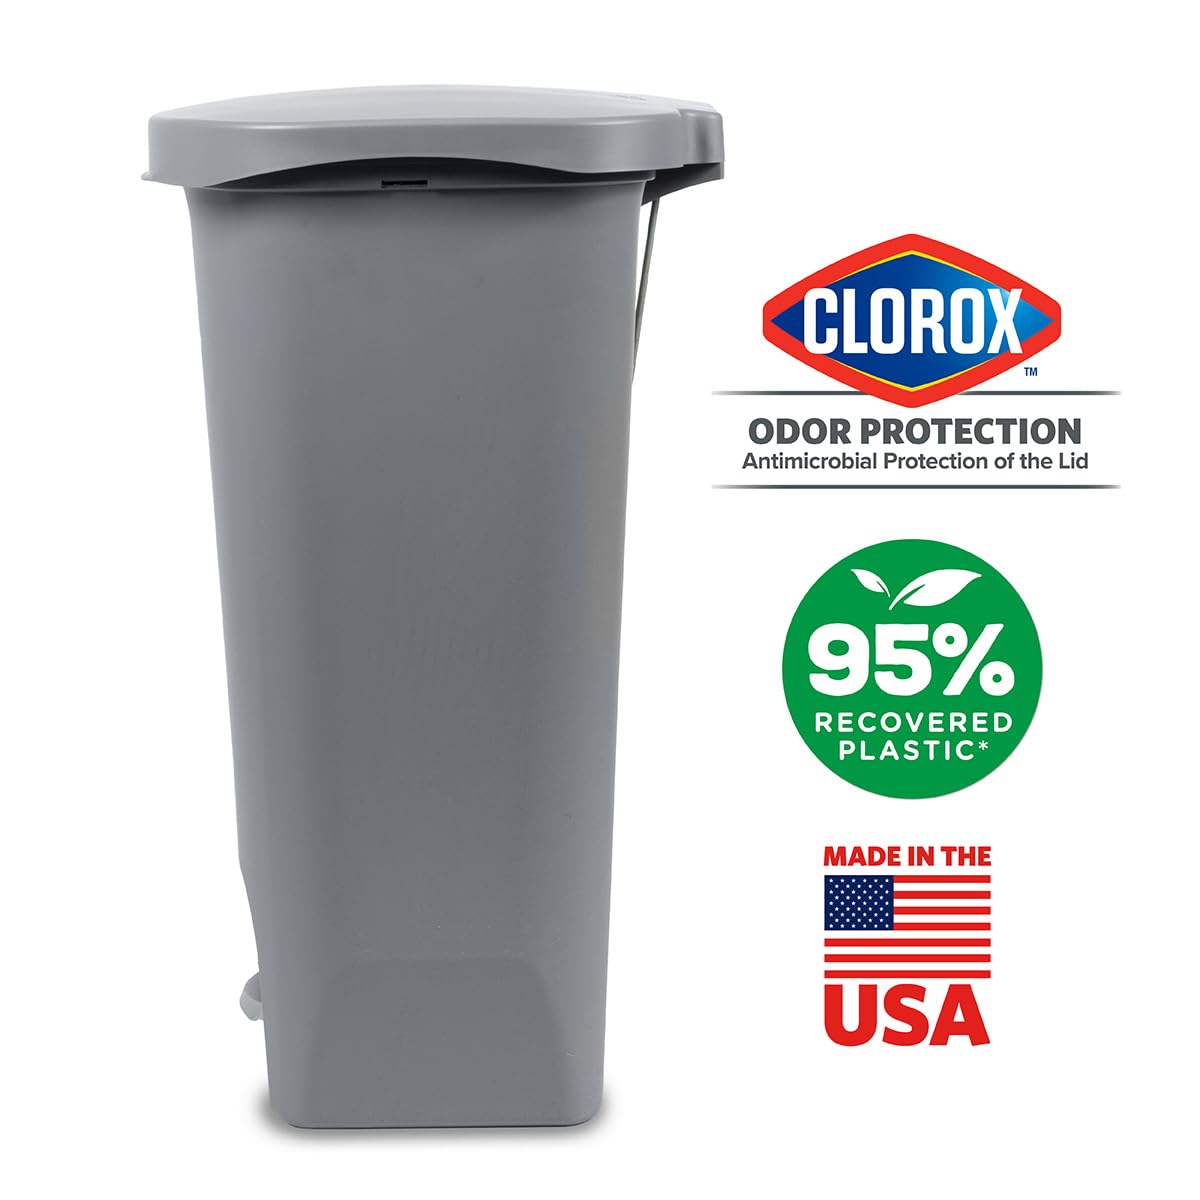 Glad 13 Gallon Trash Can 2 Pack | Plastic Kitchen Waste Bins with Odor  Protection of Lid | Hands Free with Step On Foot Pedal and Garbage Bag  Rings